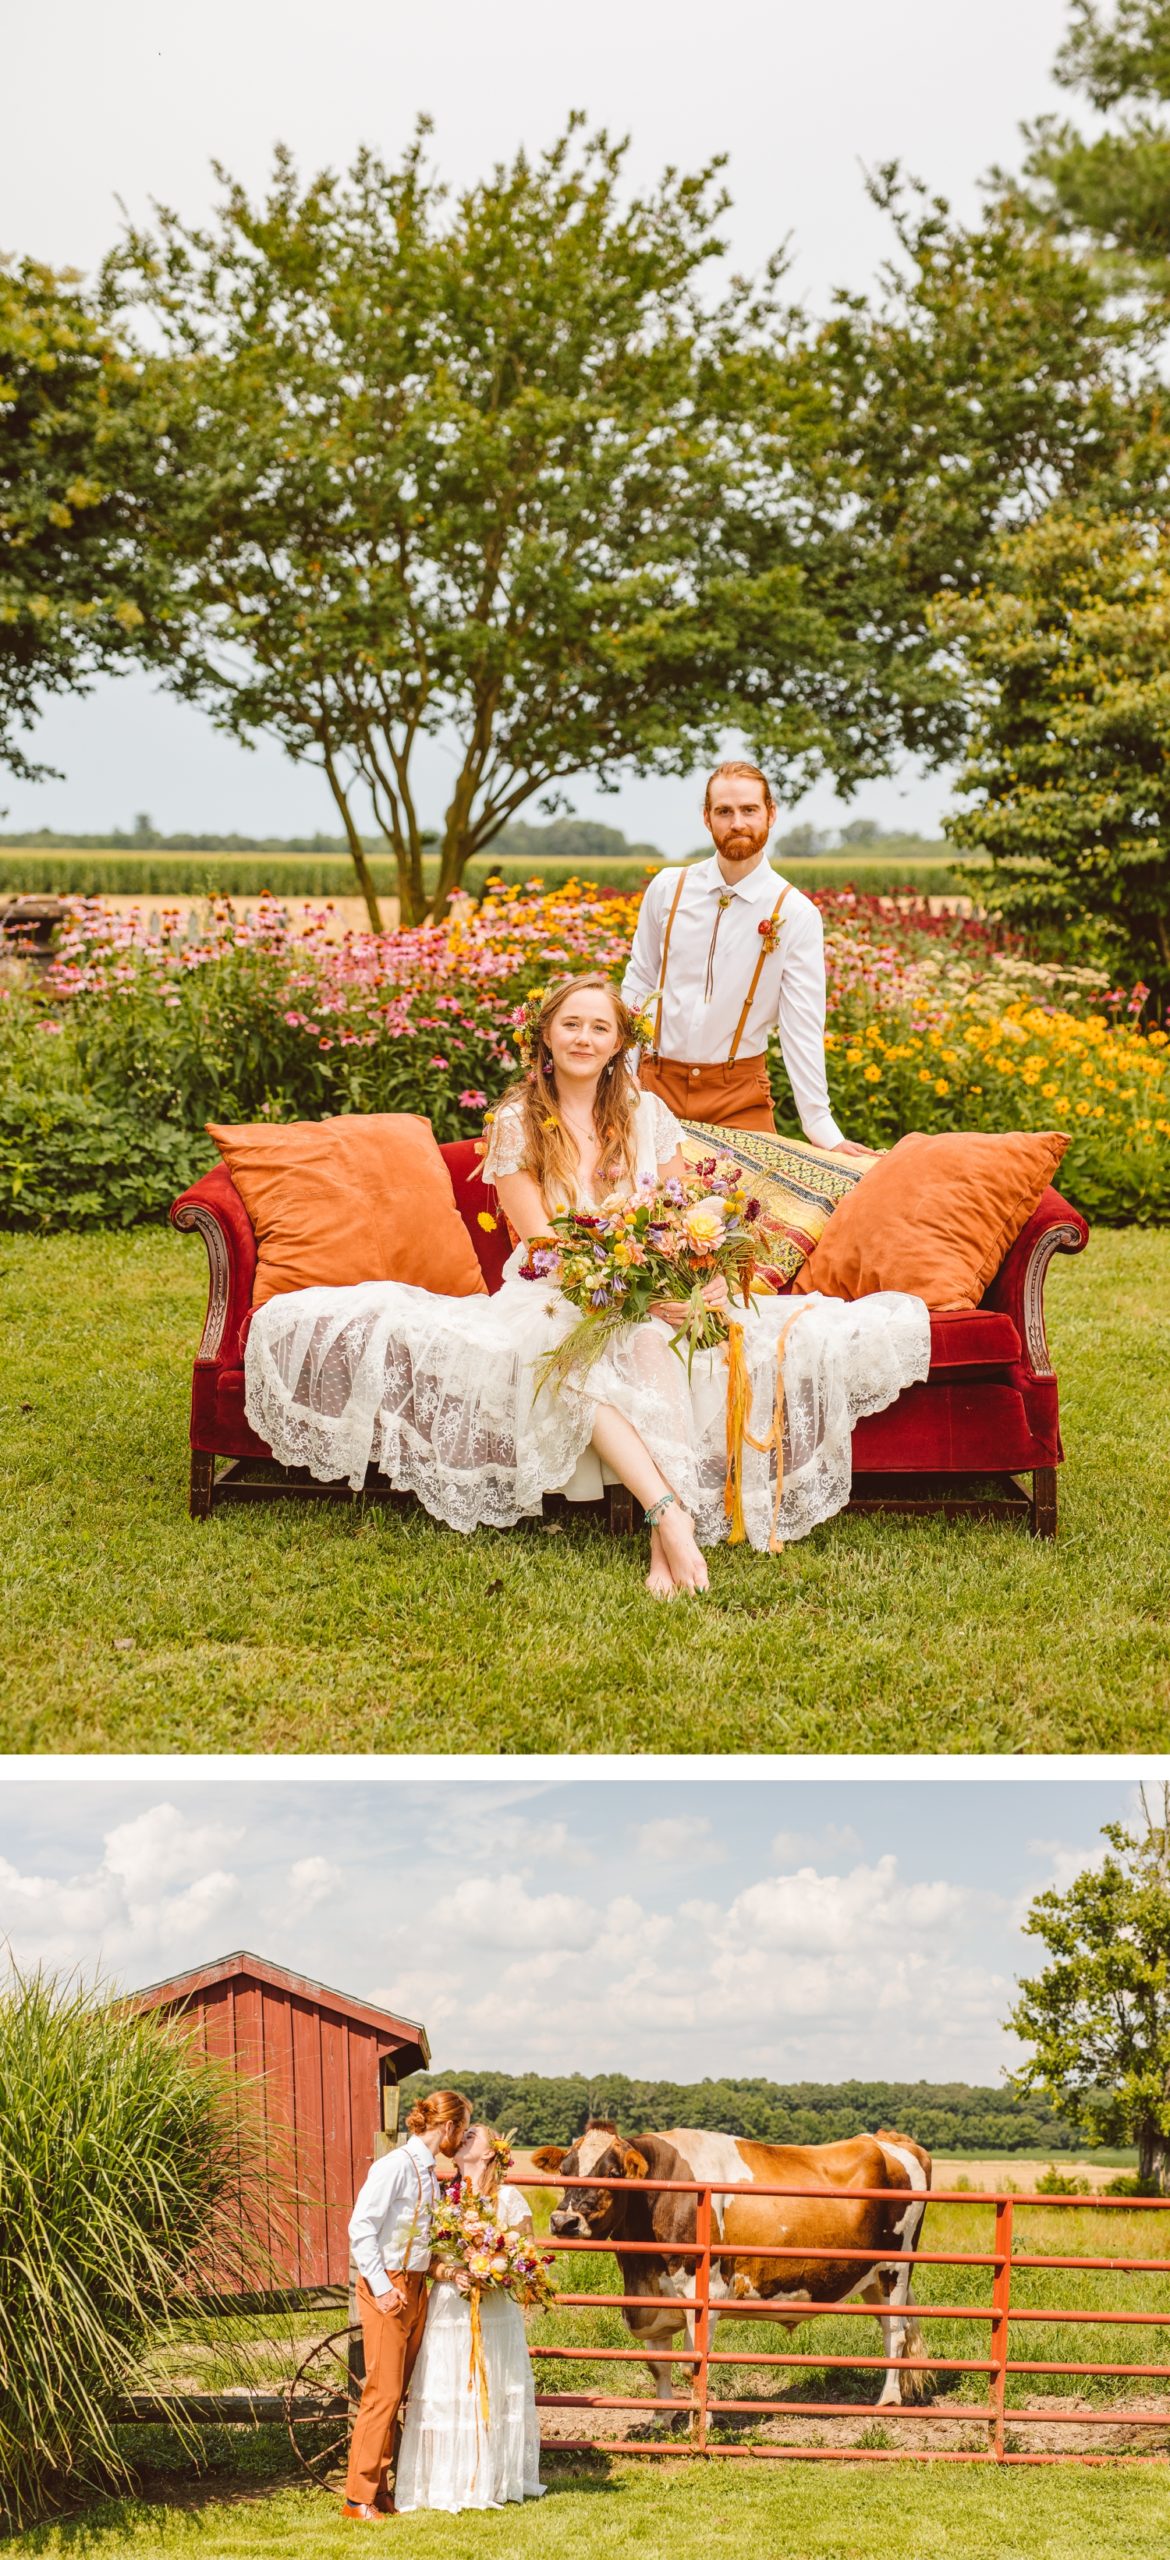 Bride sitting on couch with groom standing behind her | bride and groom kissing in front of cow | Brooke Michelle Photography